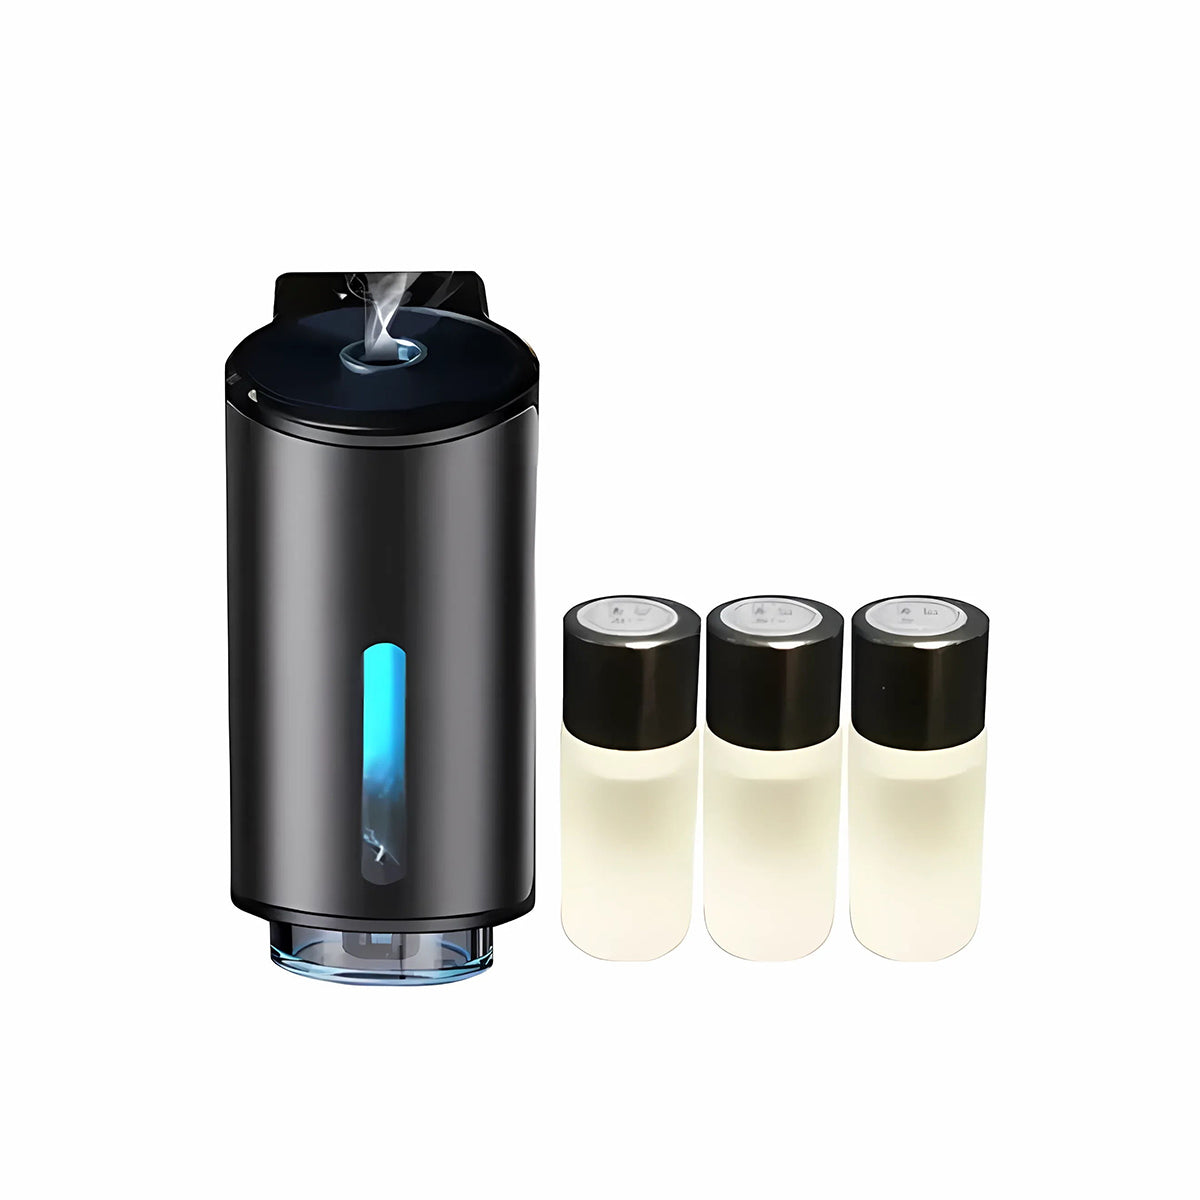 NEW Car Air Freshener With Three Adjustable Intensity levels, Car Aroma Diffuser,3 Bottle Freshener perfume Fragrance-Portable Waterless Car Diffuser Air Freshener Adjust Concentration Scent Car Aromatherapy